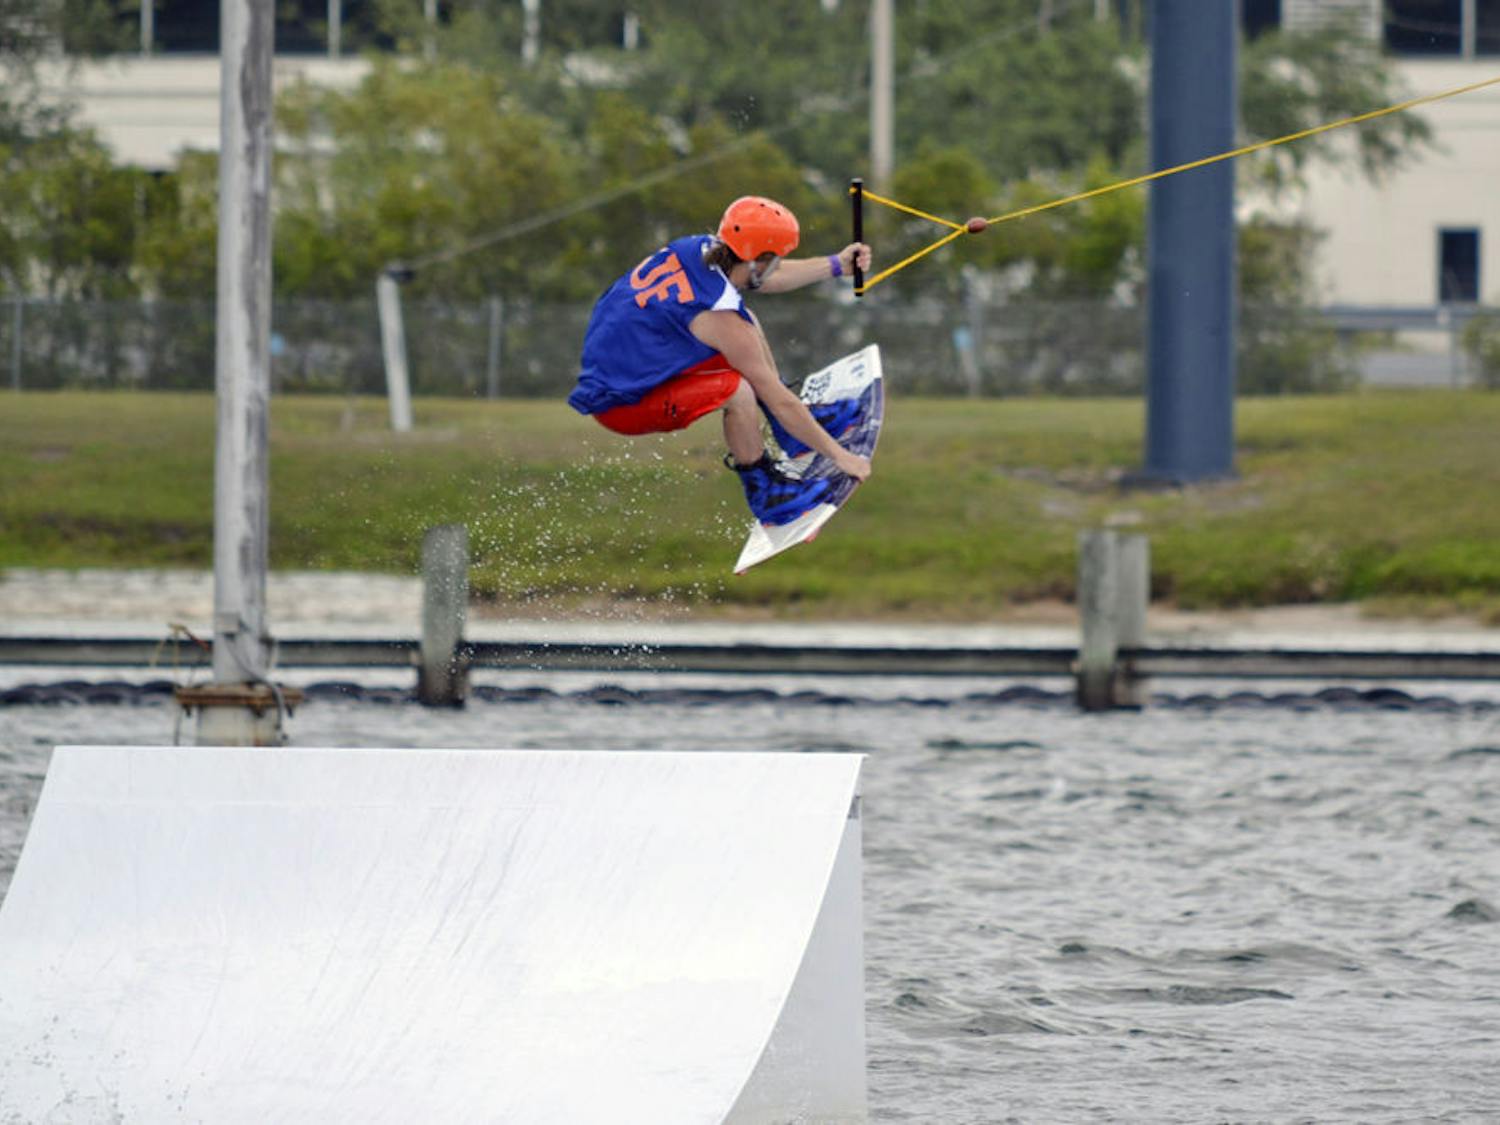 Michael Hanna, a 22-year-old UF biochemistry senior, performs a wakeboard stunt on cables in the Orlando Watersports Complex on Sunday afternoon. UF’s Wakeboarding Club placed second in the Red Bull Rival competition over the weekend.